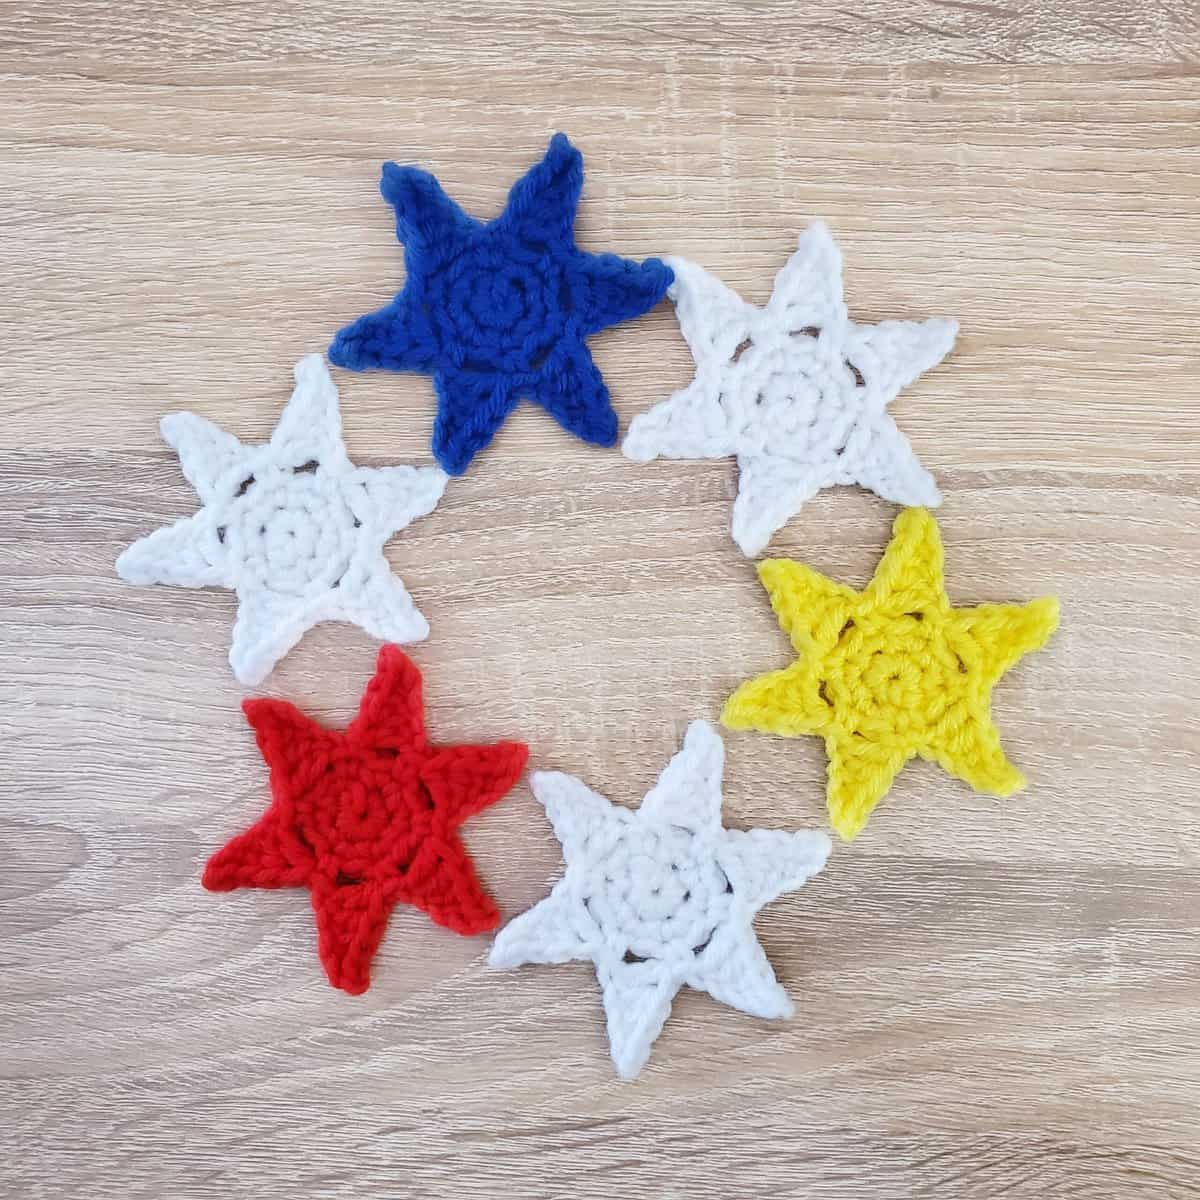 completed crochet stars